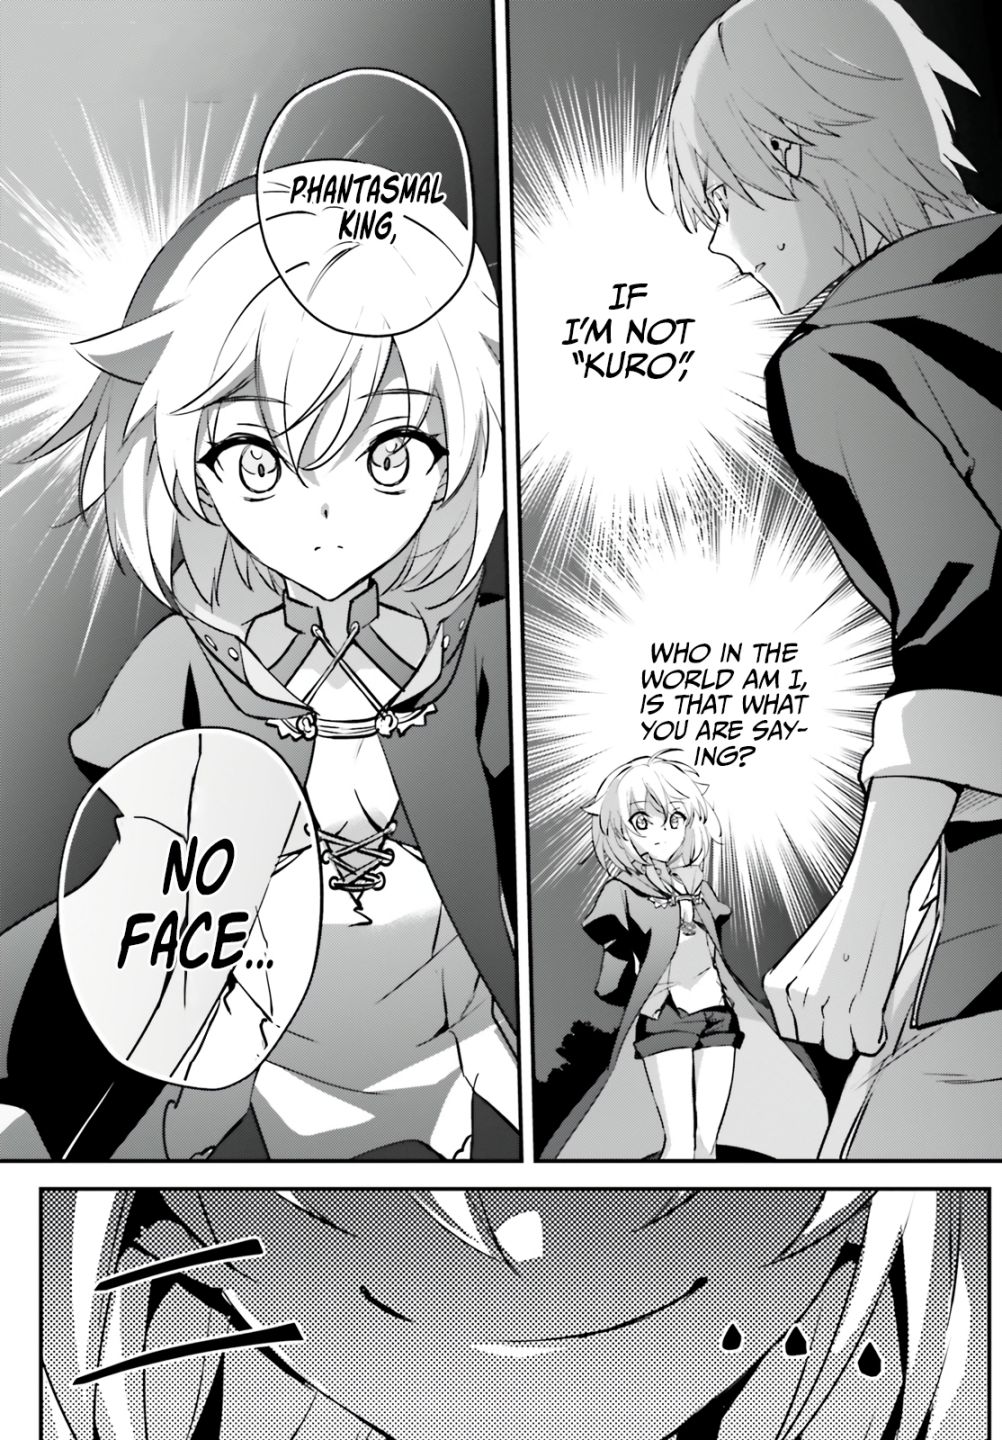 I Was Caught Up In A Hero Summoning, But That World Is At Peace - Page 2